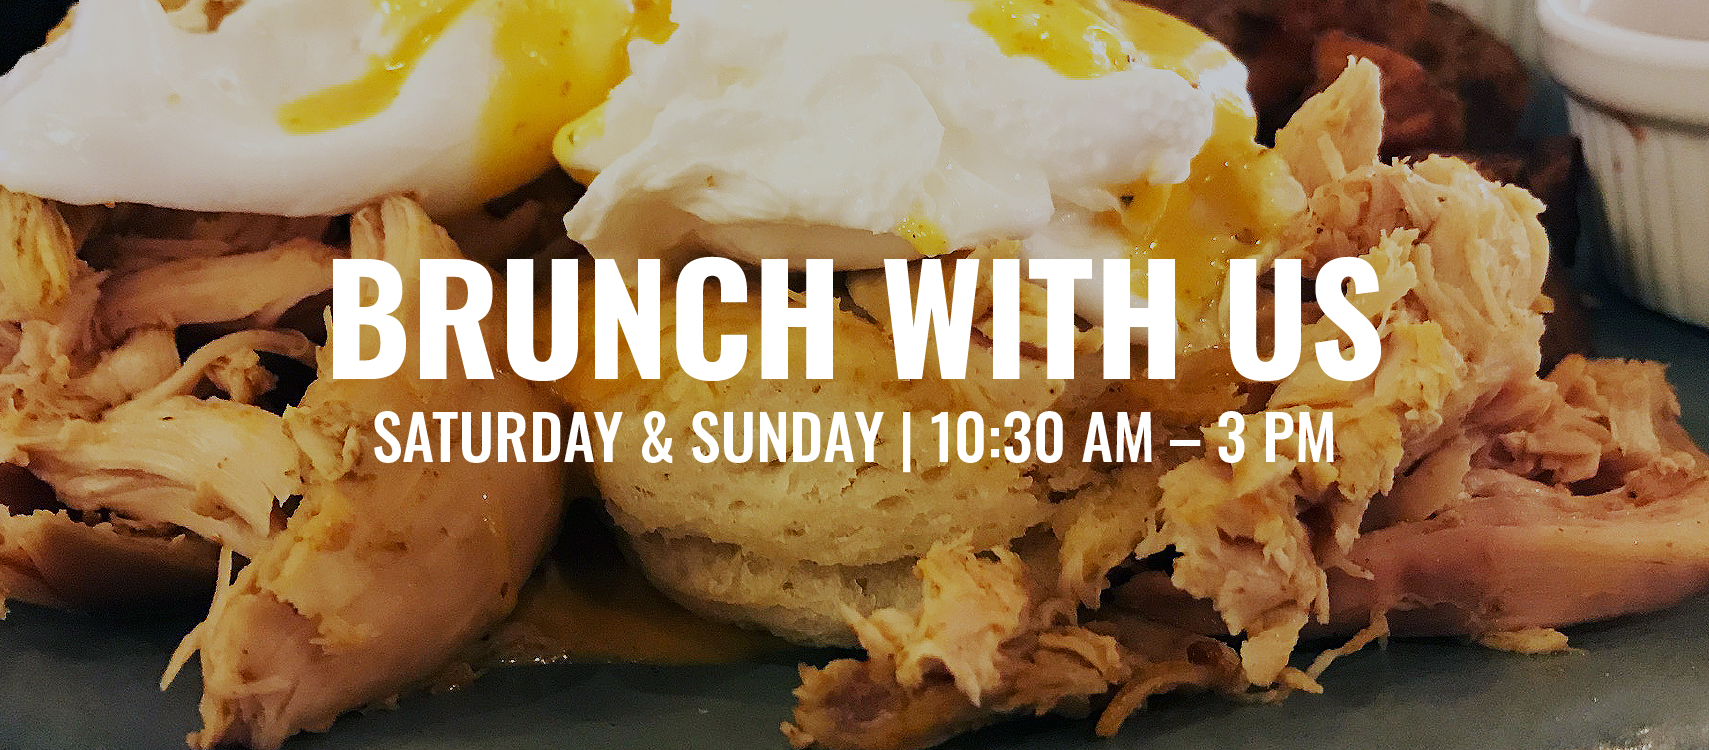 Brunch with us!